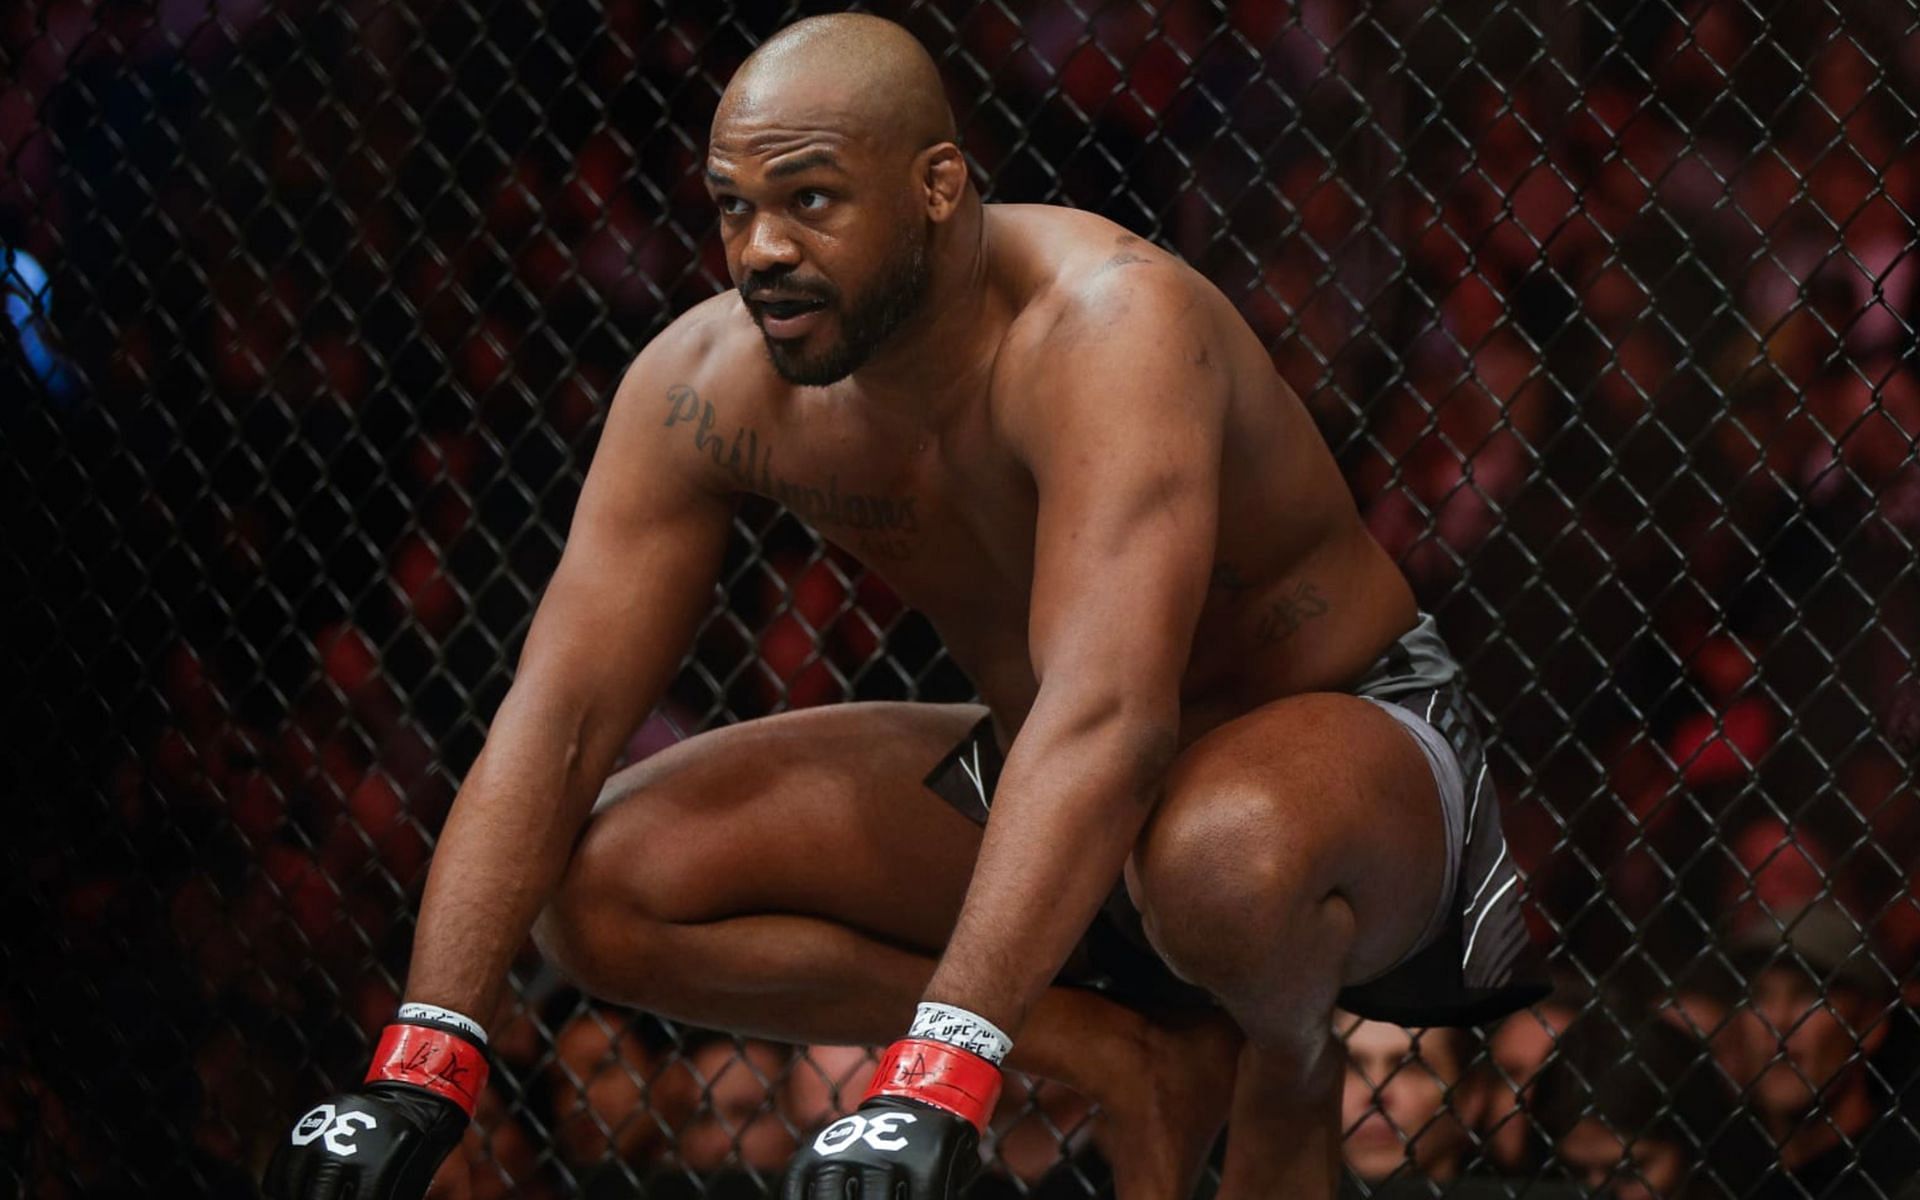 Jon Jones (pictured) making his heavyweight debut at UFC 285 [Photo Courtesy: Getty Images]